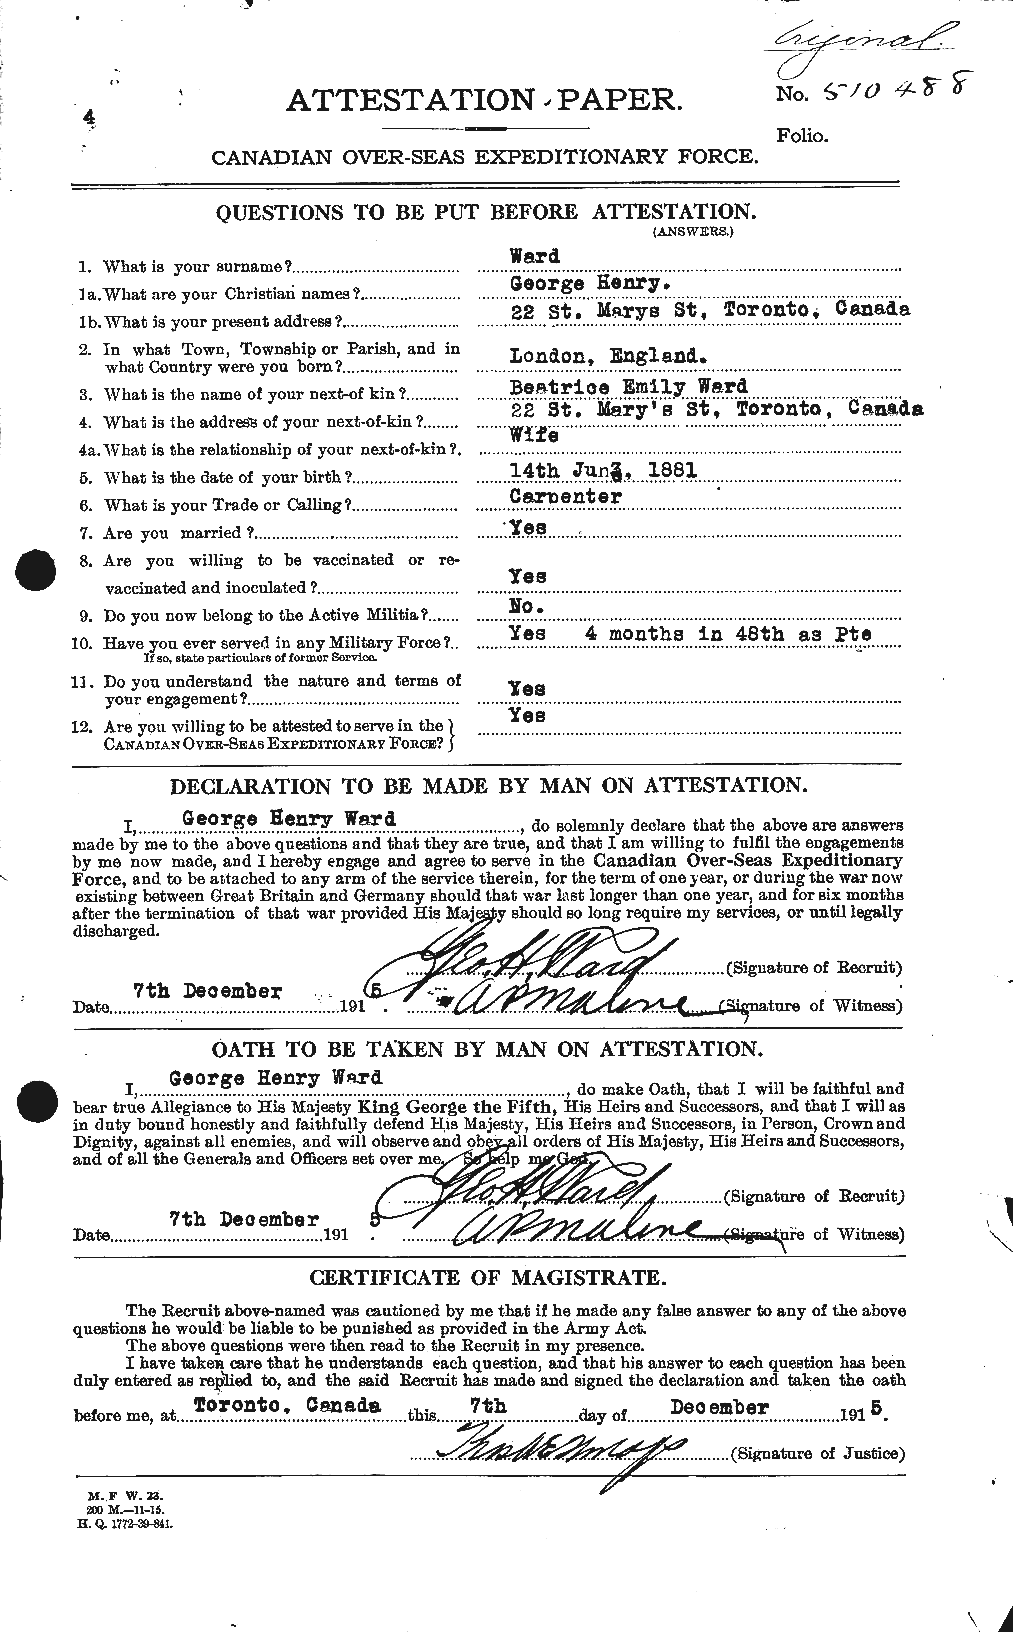 Personnel Records of the First World War - CEF 657776a